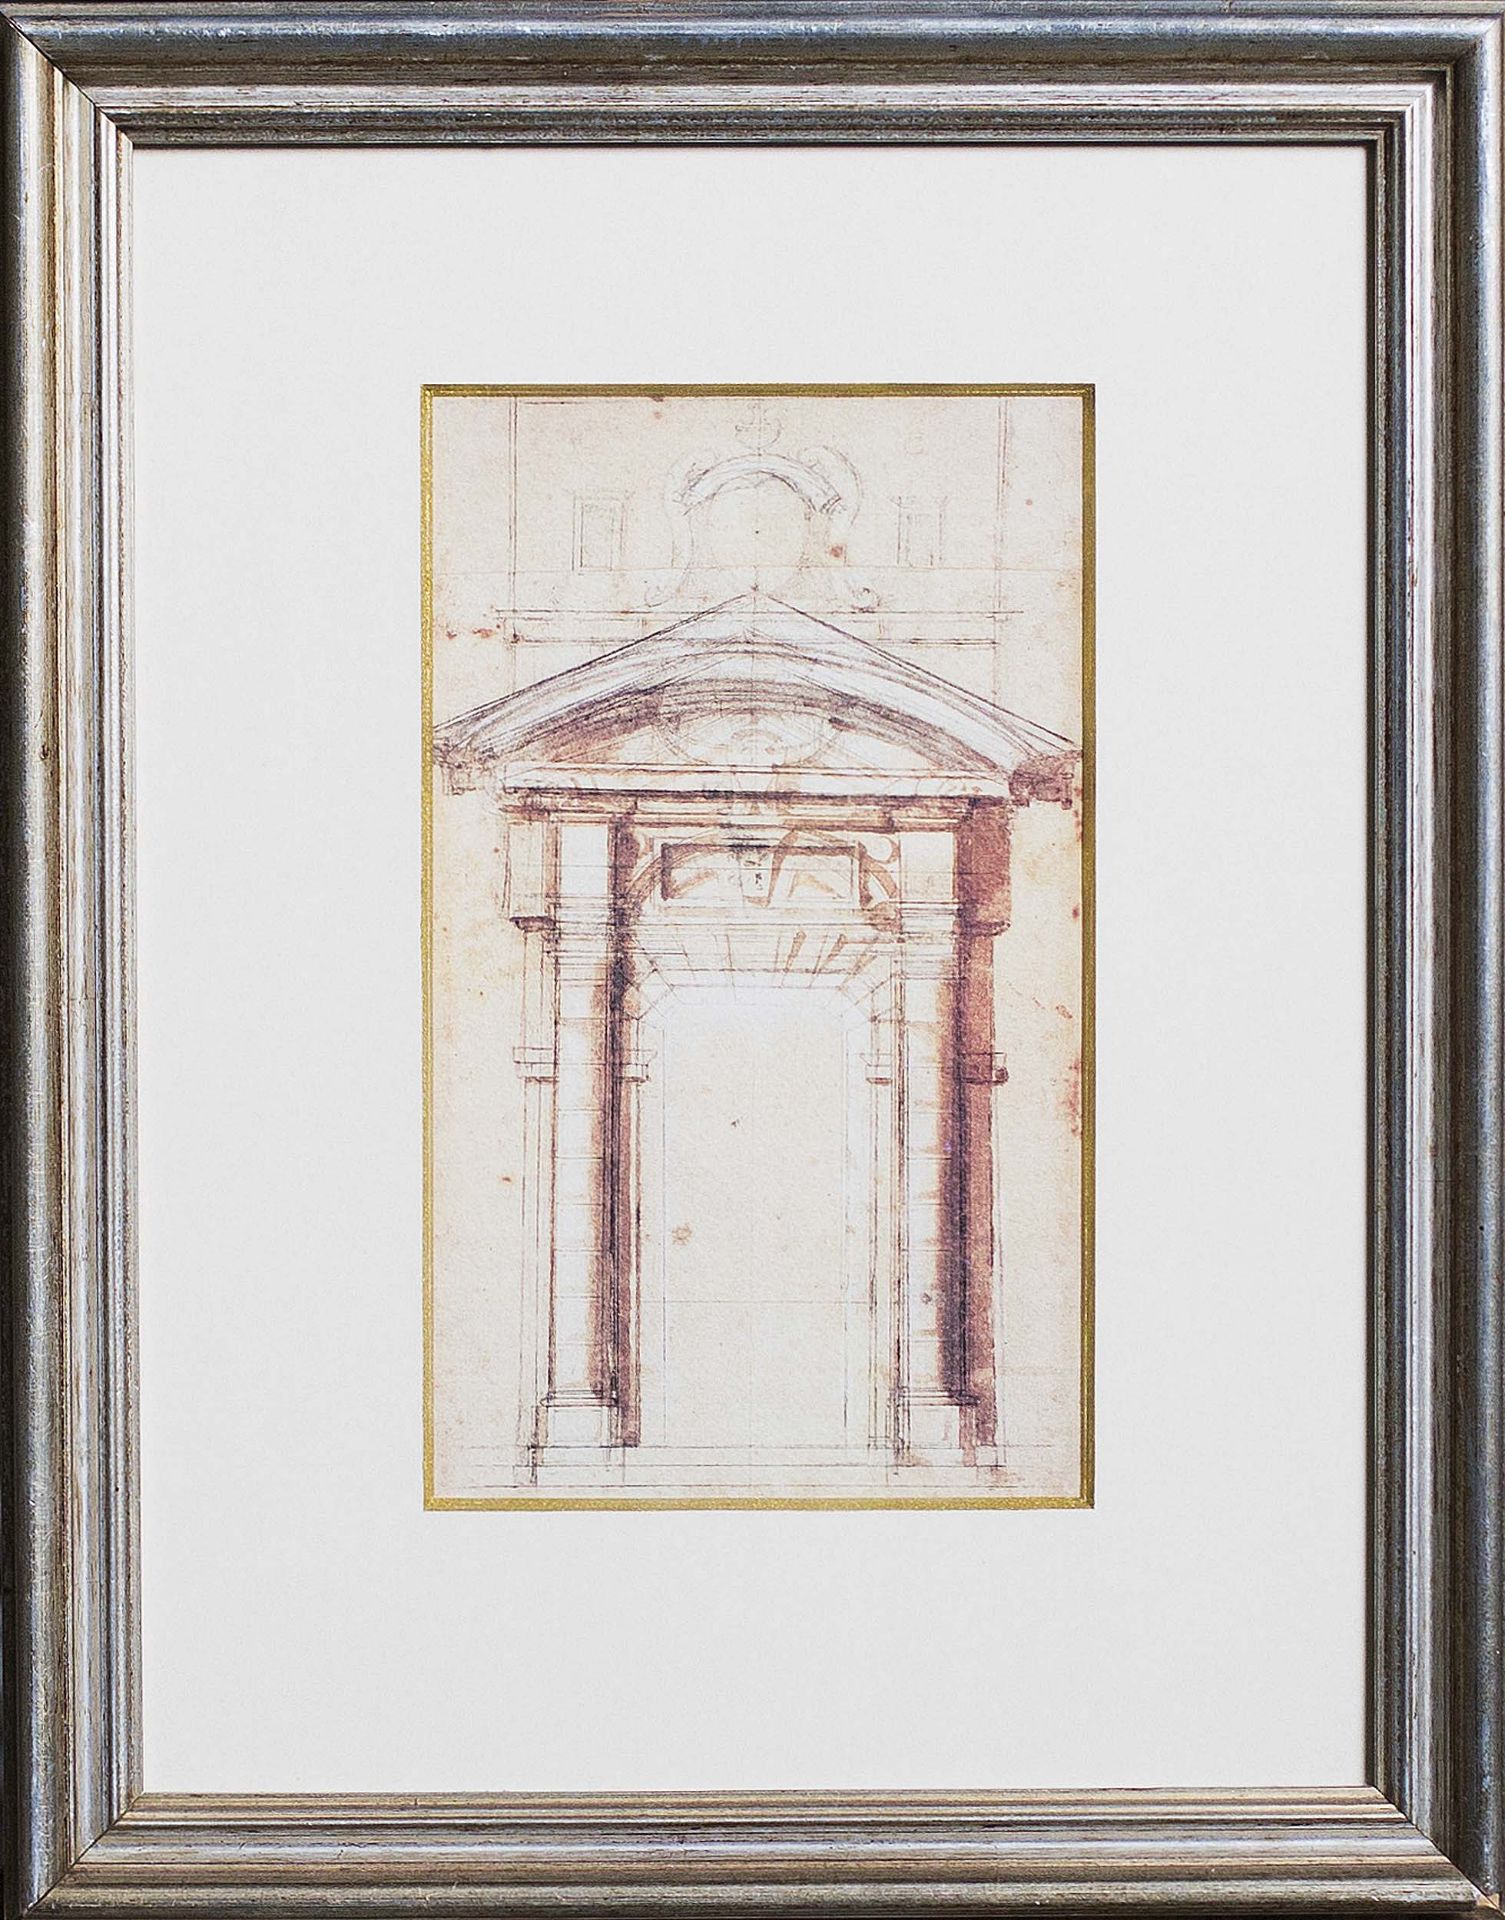 Series of six prints of a Roman temple entrance in a silver frame 49 x 39cm - Image 6 of 6